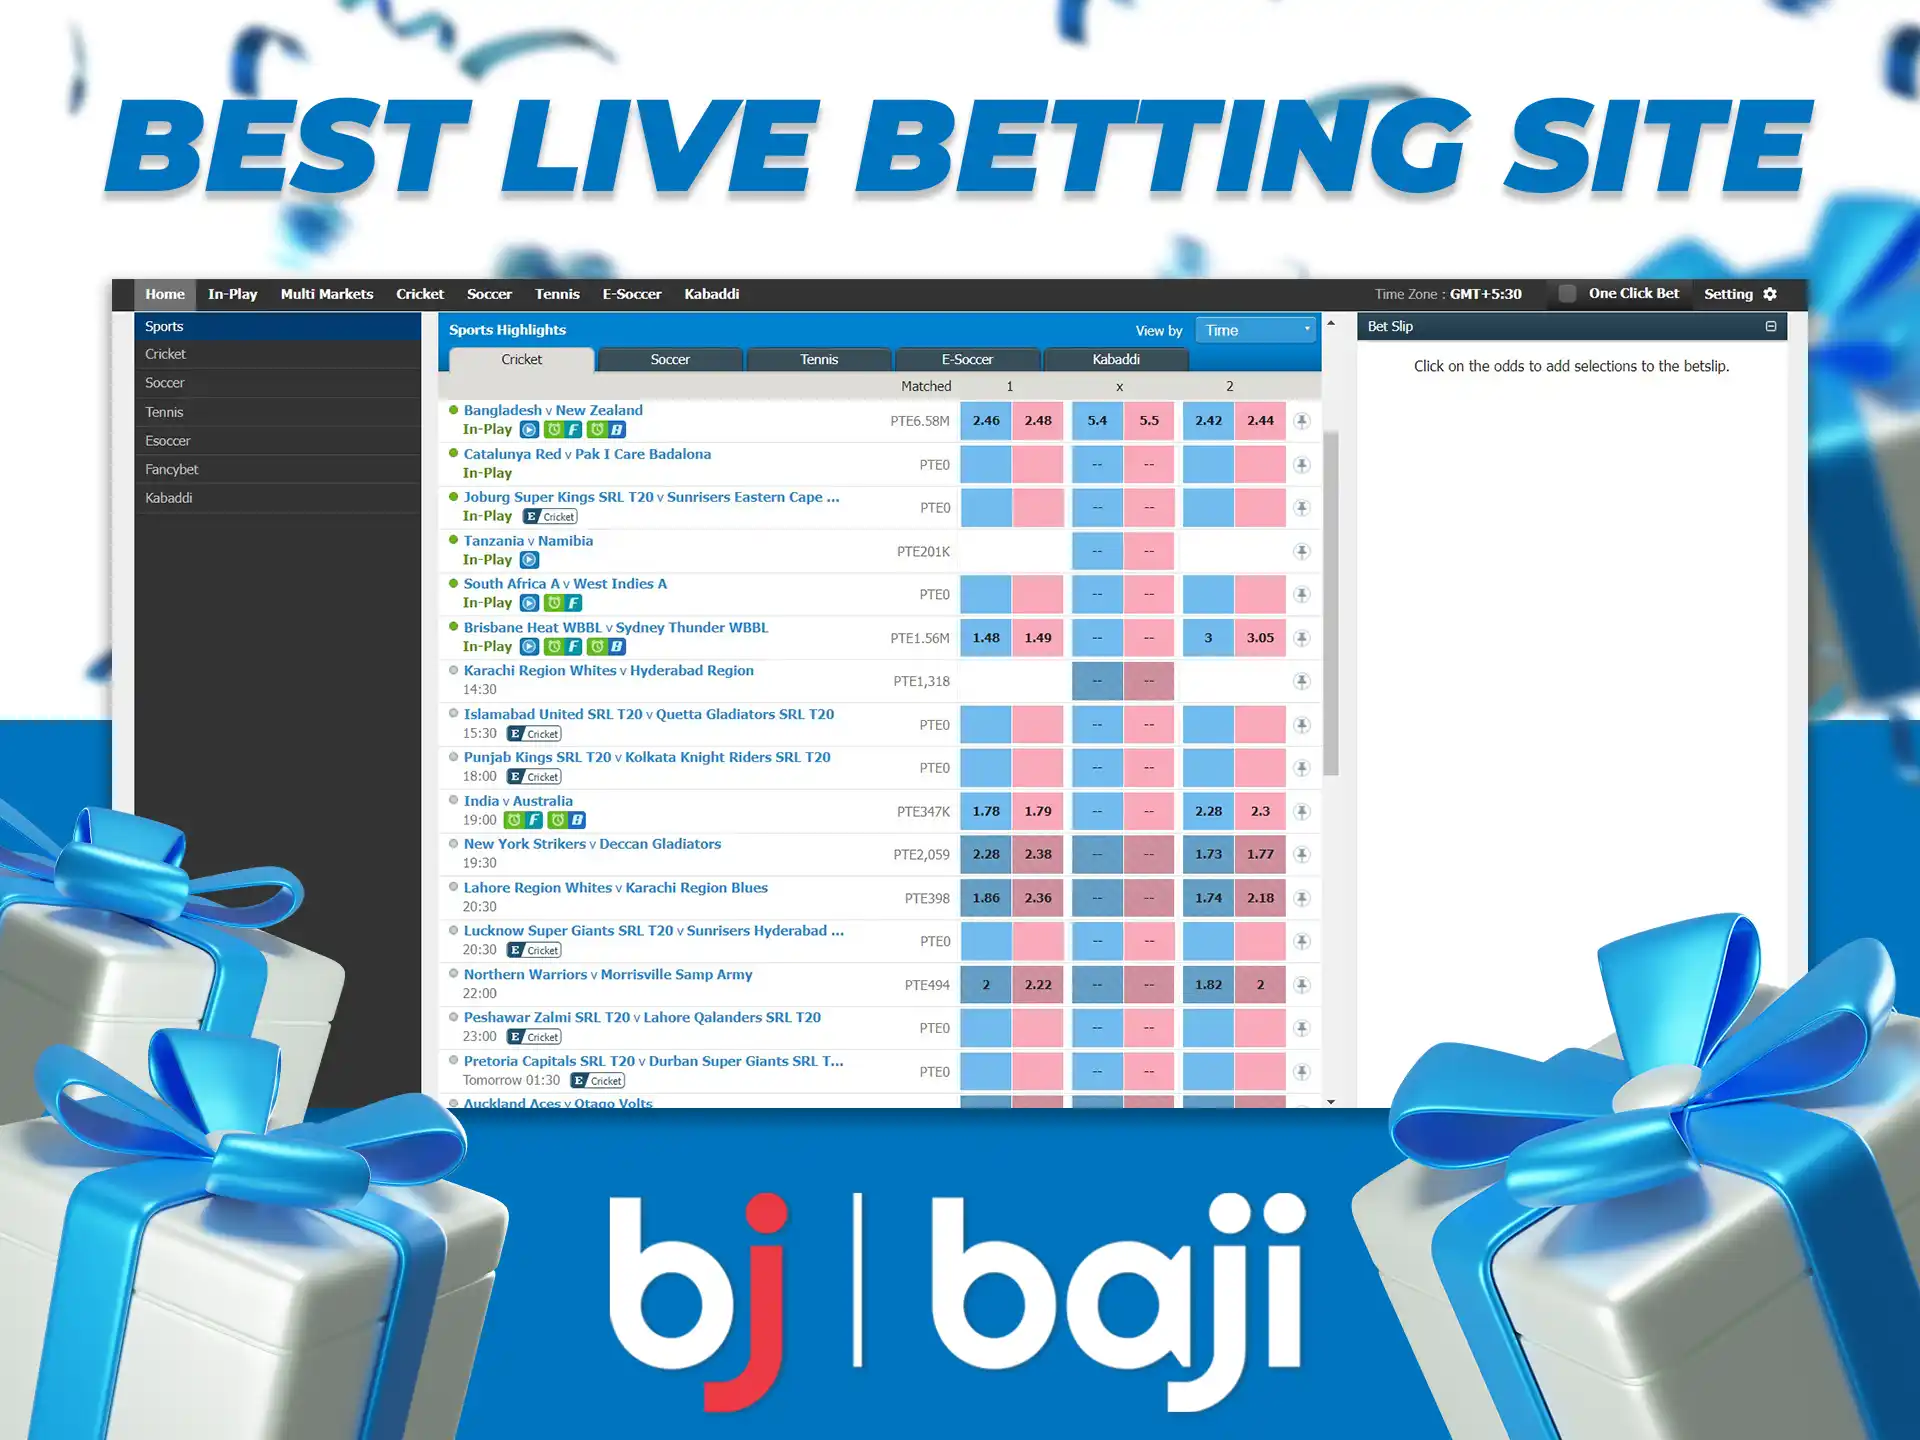 Bet on popular sporting events on Baji Live in real time.